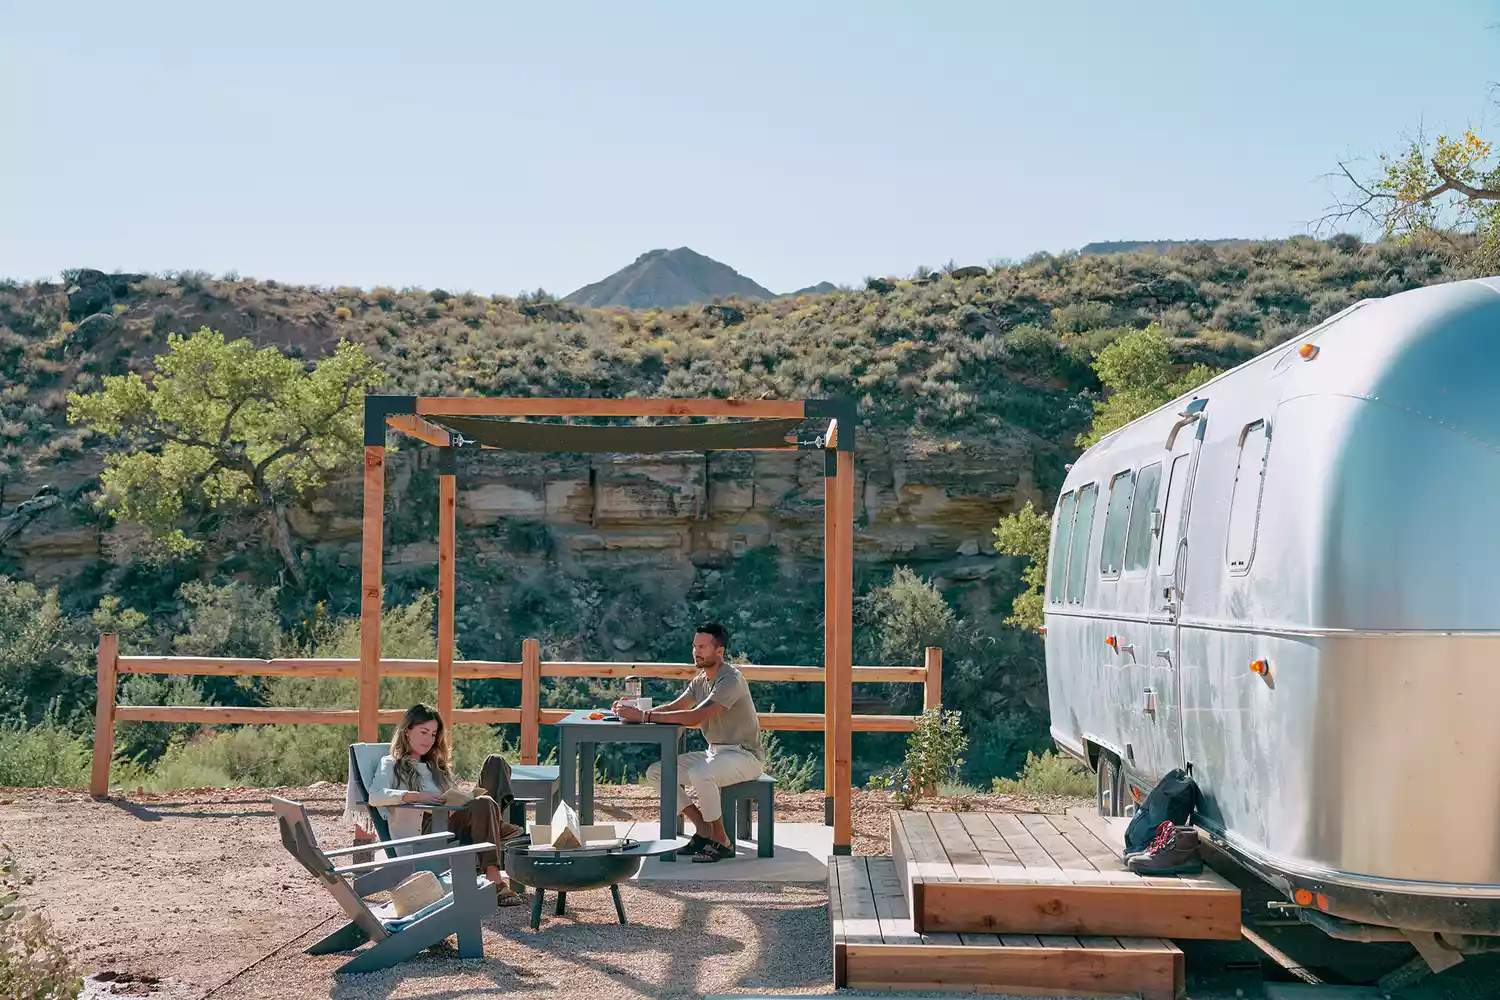 Airstream Glamping Resort Opens Near Zion National Park